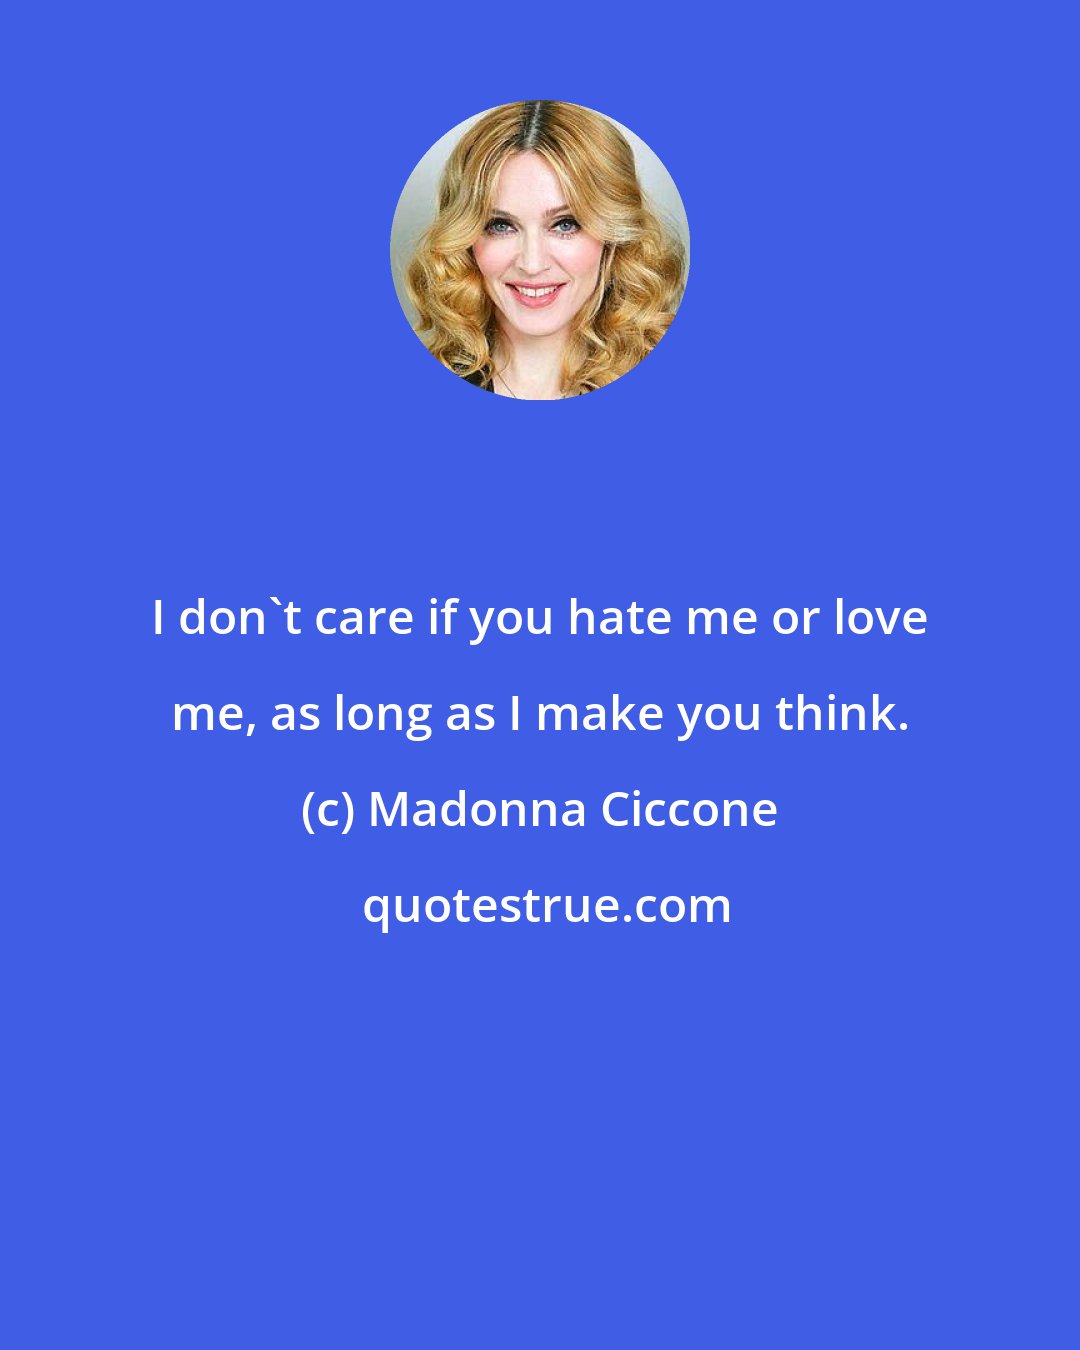 Madonna Ciccone: I don't care if you hate me or love me, as long as I make you think.